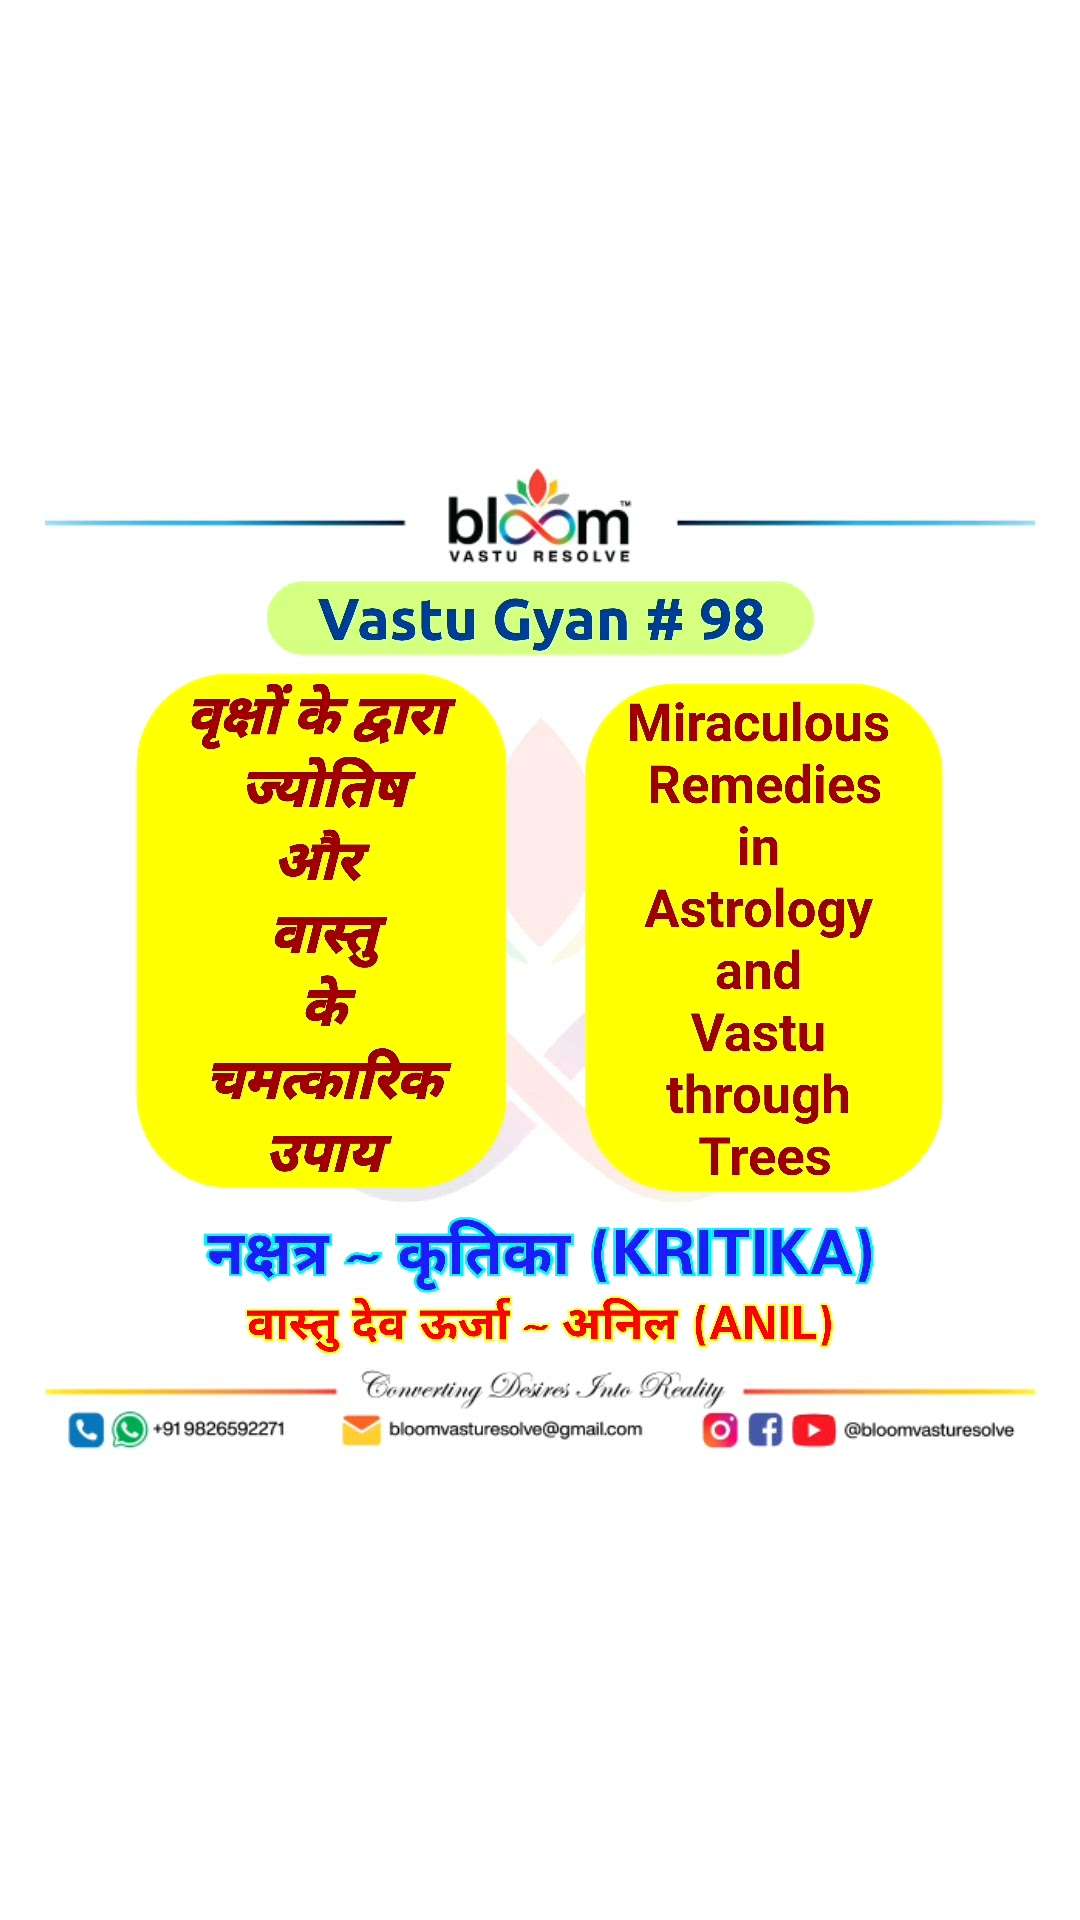 Which Nakshatra tree do you want to know, kindly write in the comment box.

For more Vastu please follow @bloomvasturesolve
on YouTube, Instagram & Facebook
.
.
For personal consultation, feel free to contact certified MahaVastu Expert through
M - 9826592271
Or
bloomvasturesolve@gmail.com

#vastu 
#mahavastu 
#mahavastuexpert
#bloomvasturesolve
#BirthConstellationTree
#vasturemedies
#astrovastu
#astrology
#DivineEnergyRemedy
#Sacredtree
#kritika
#anil
#गूलर
#cluster_fig